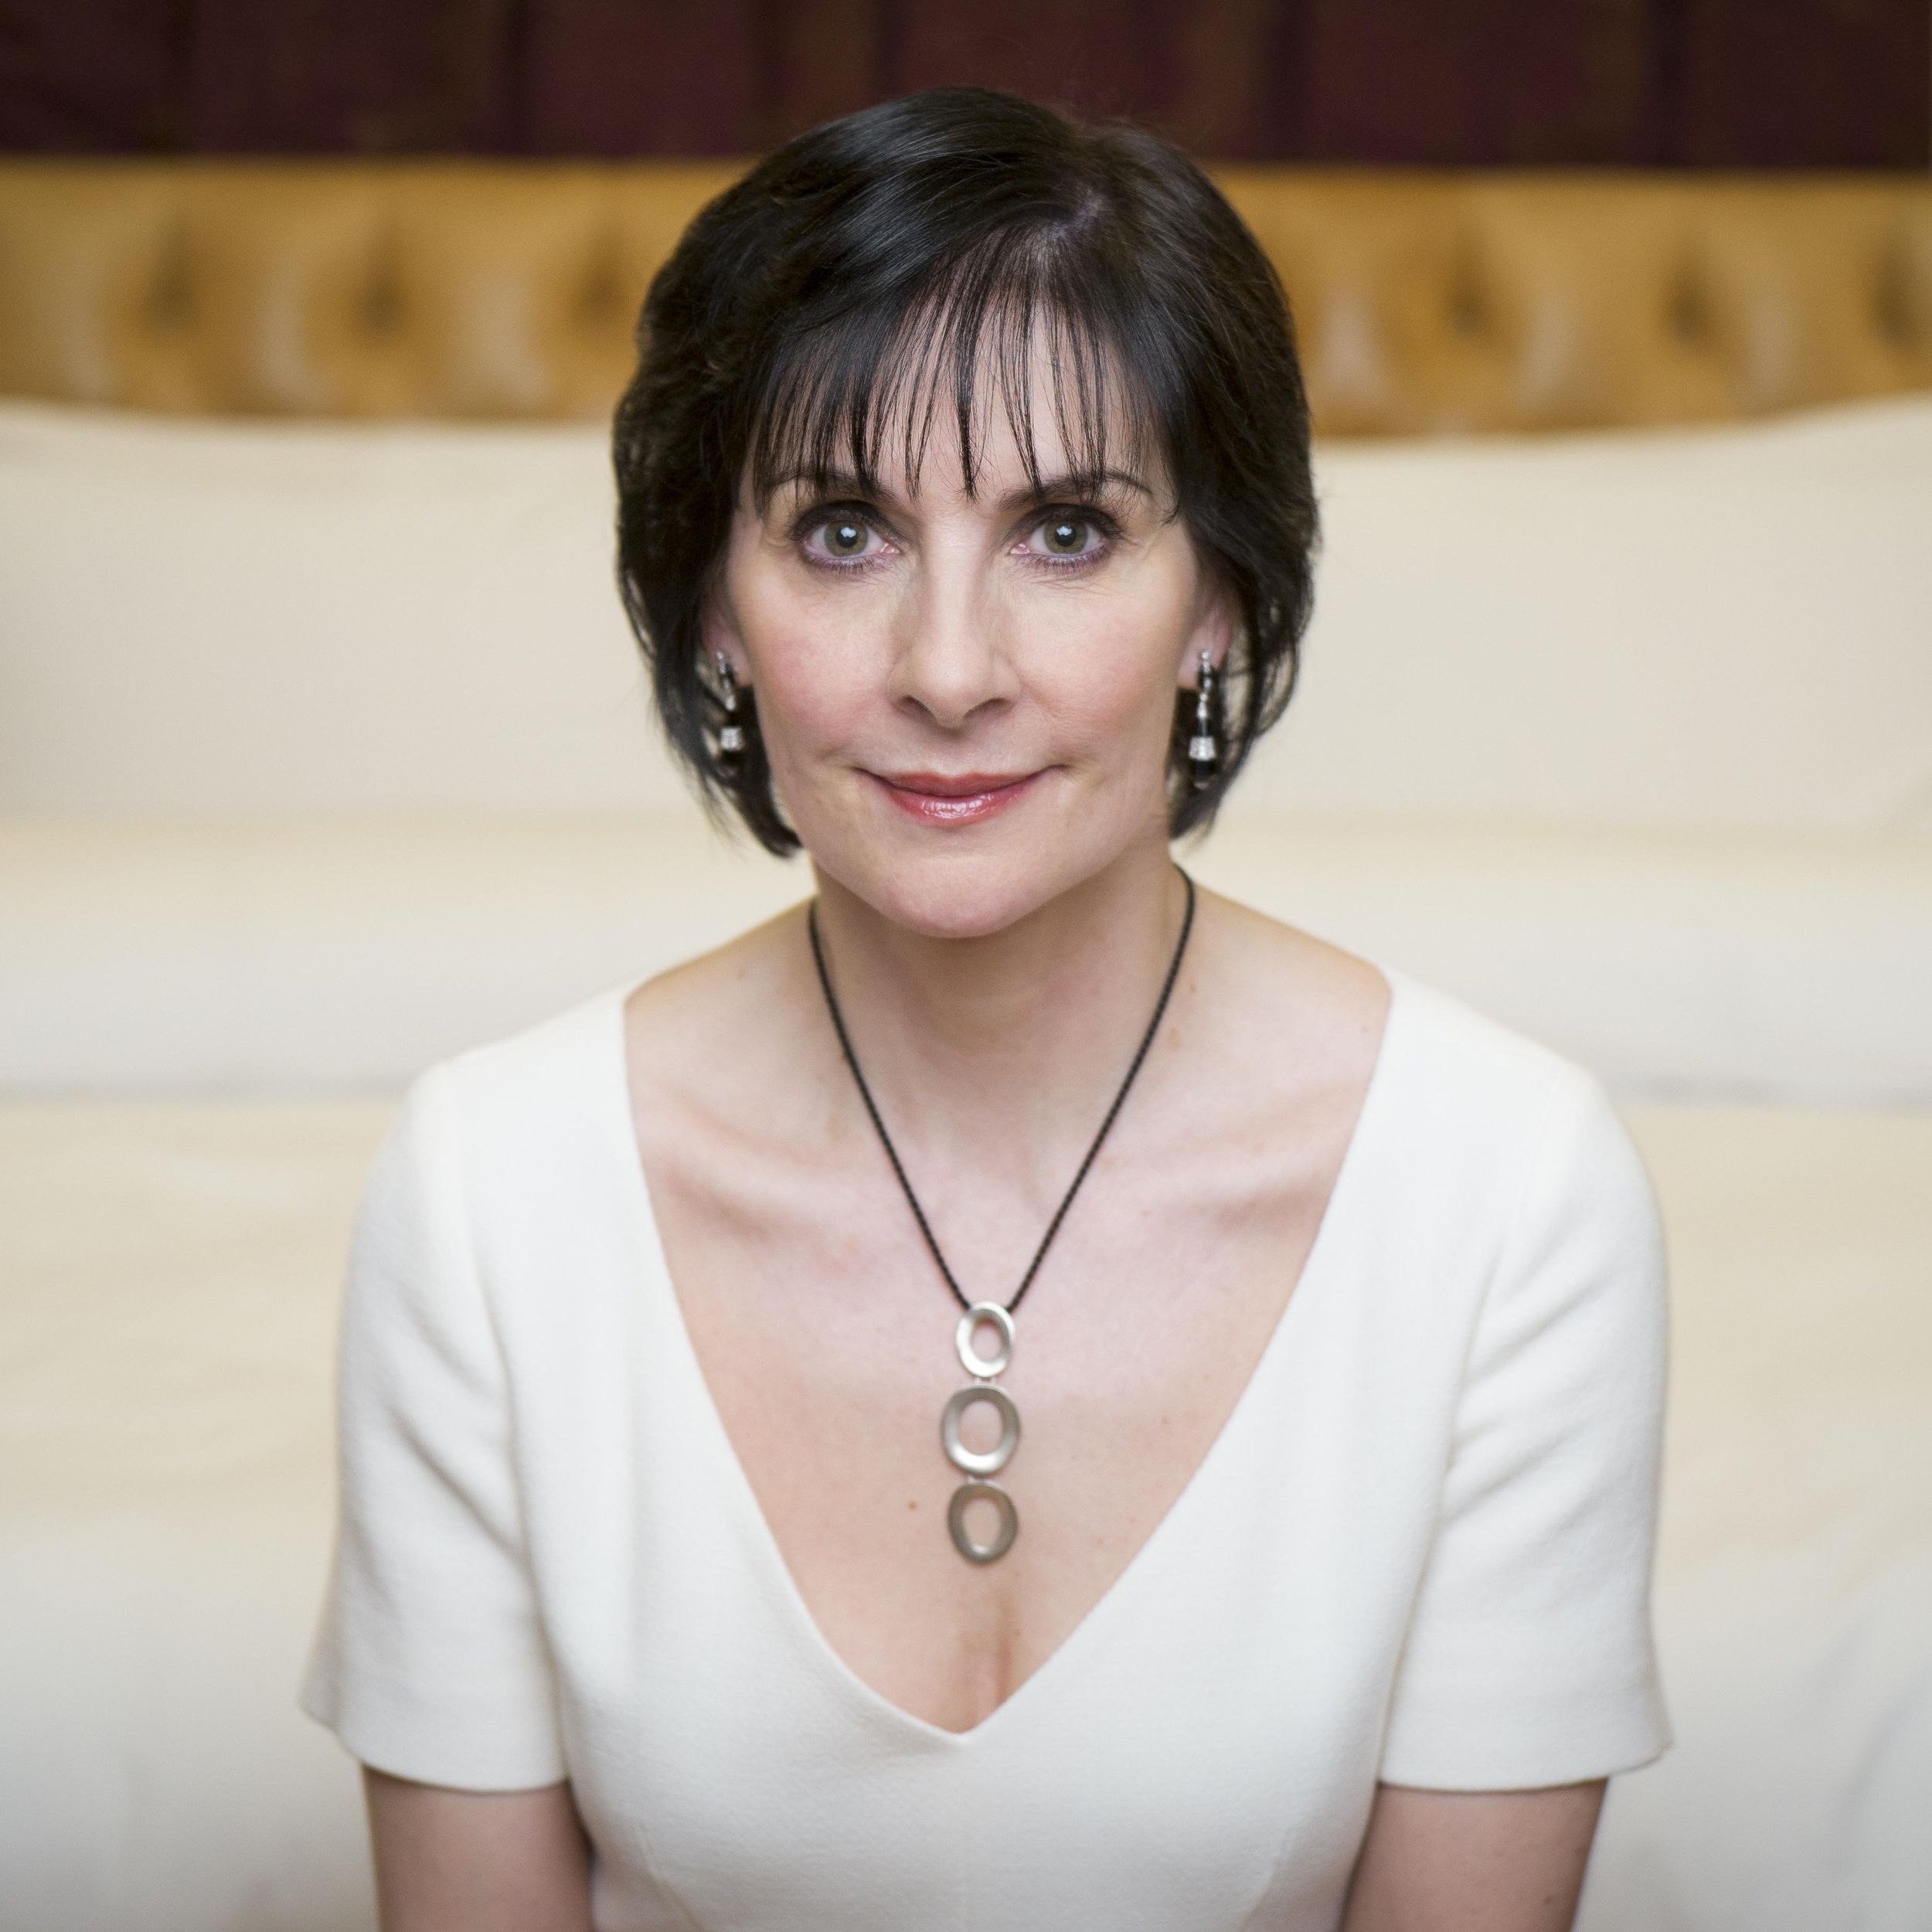 Irish singer Enya returns with ethereal style she's made her own